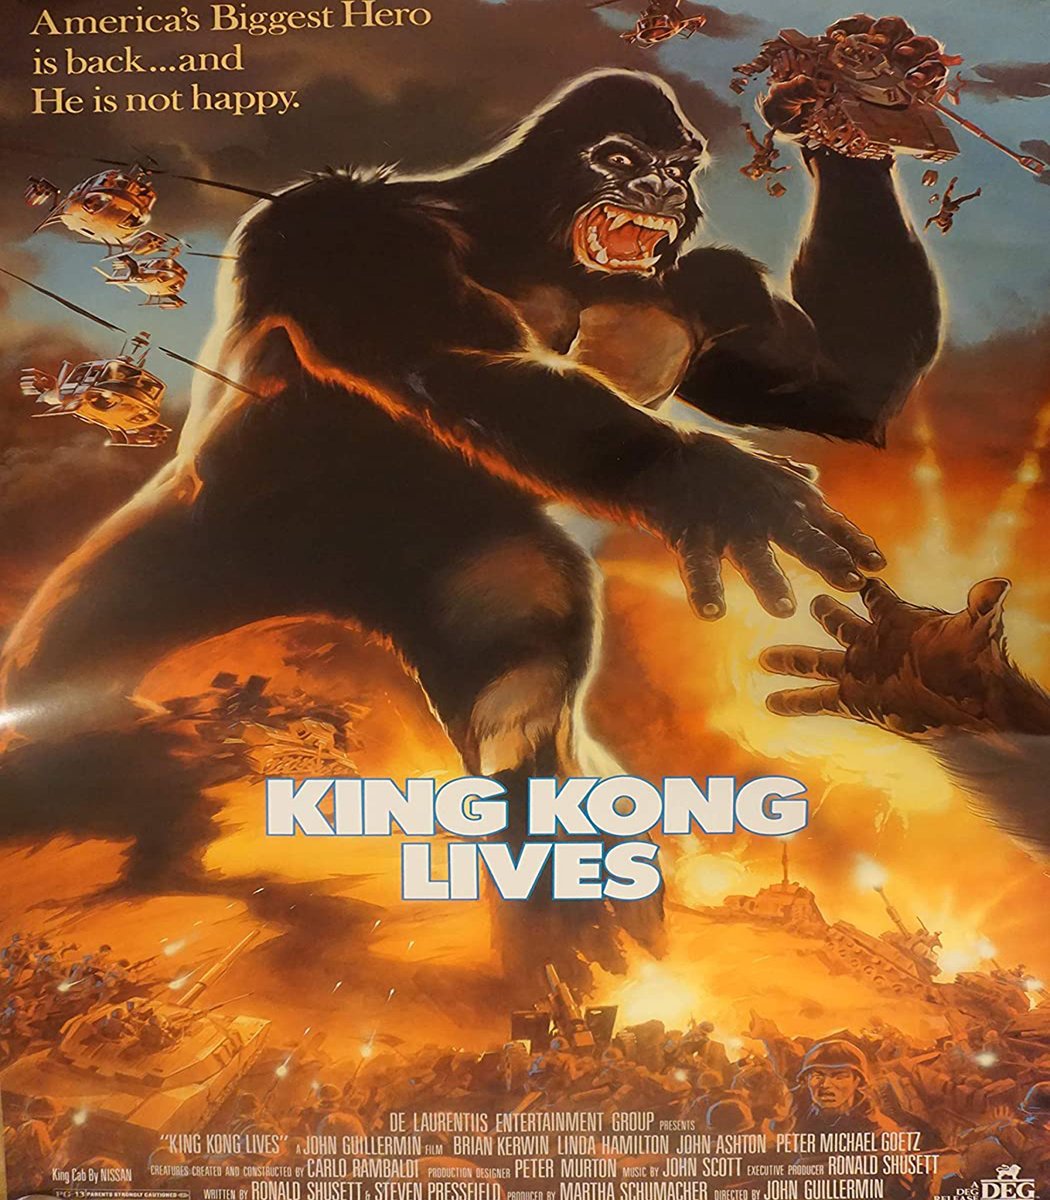 Alex Thorn On Twitter After Watching King Kong Last Night I